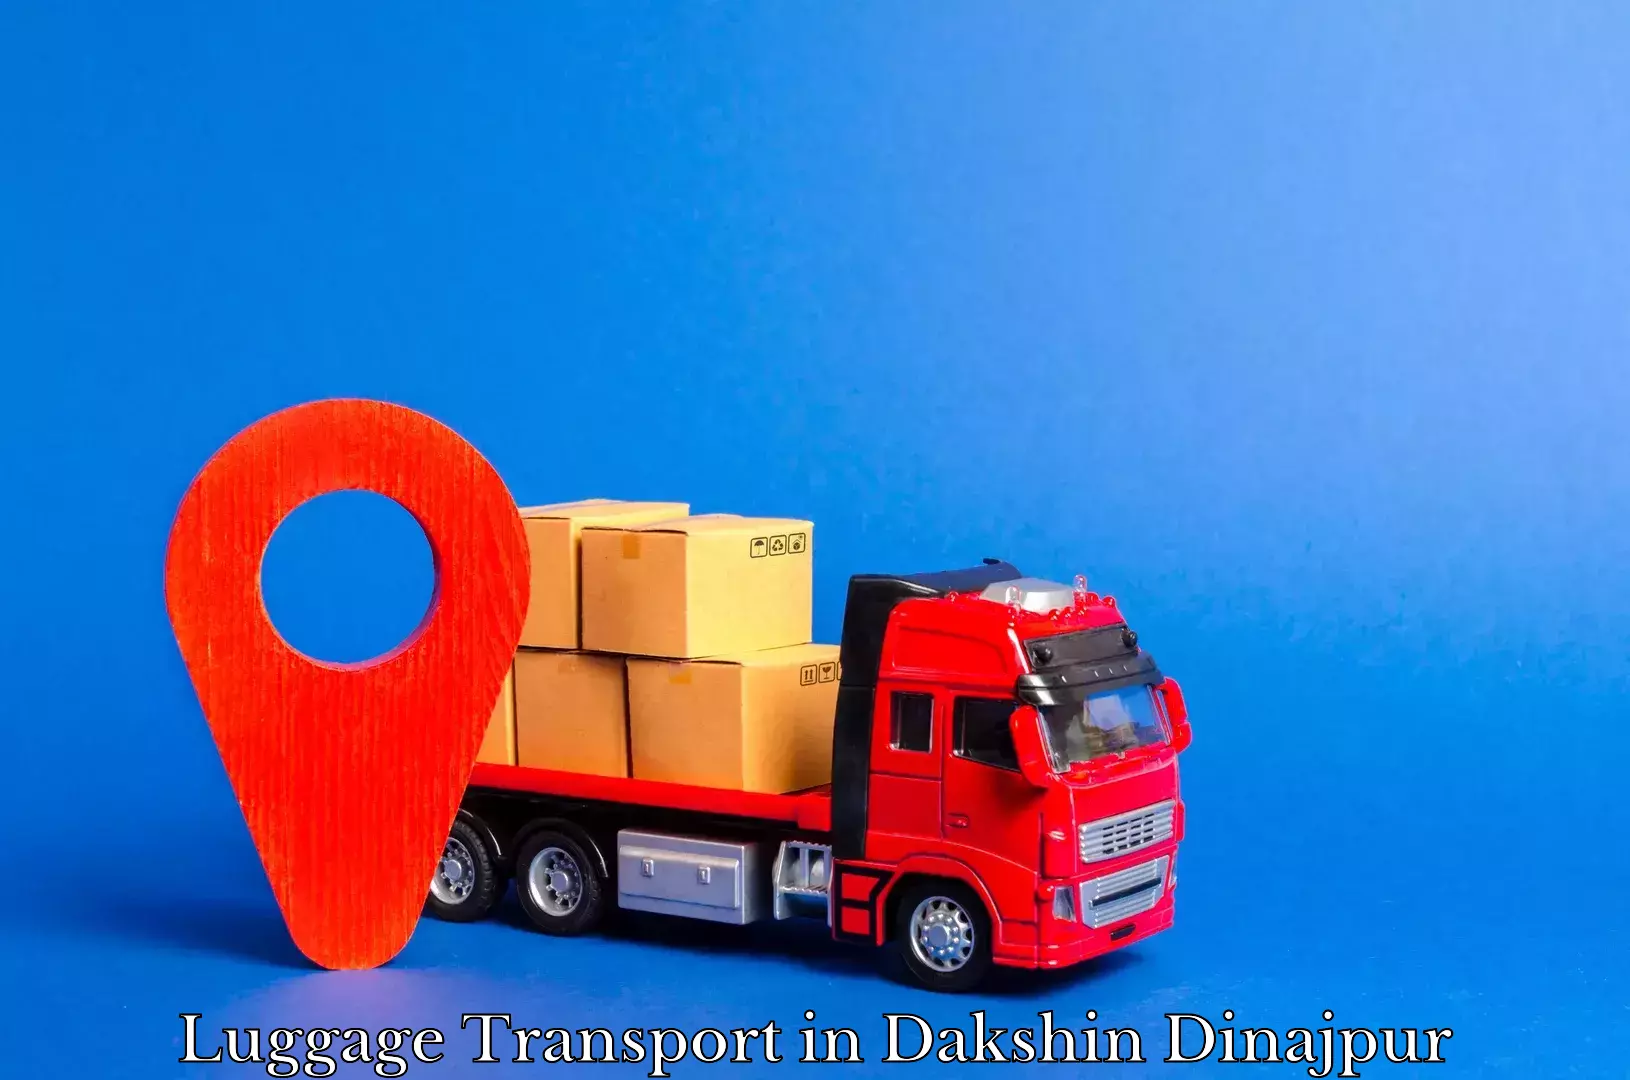 Baggage delivery scheduling in Dakshin Dinajpur